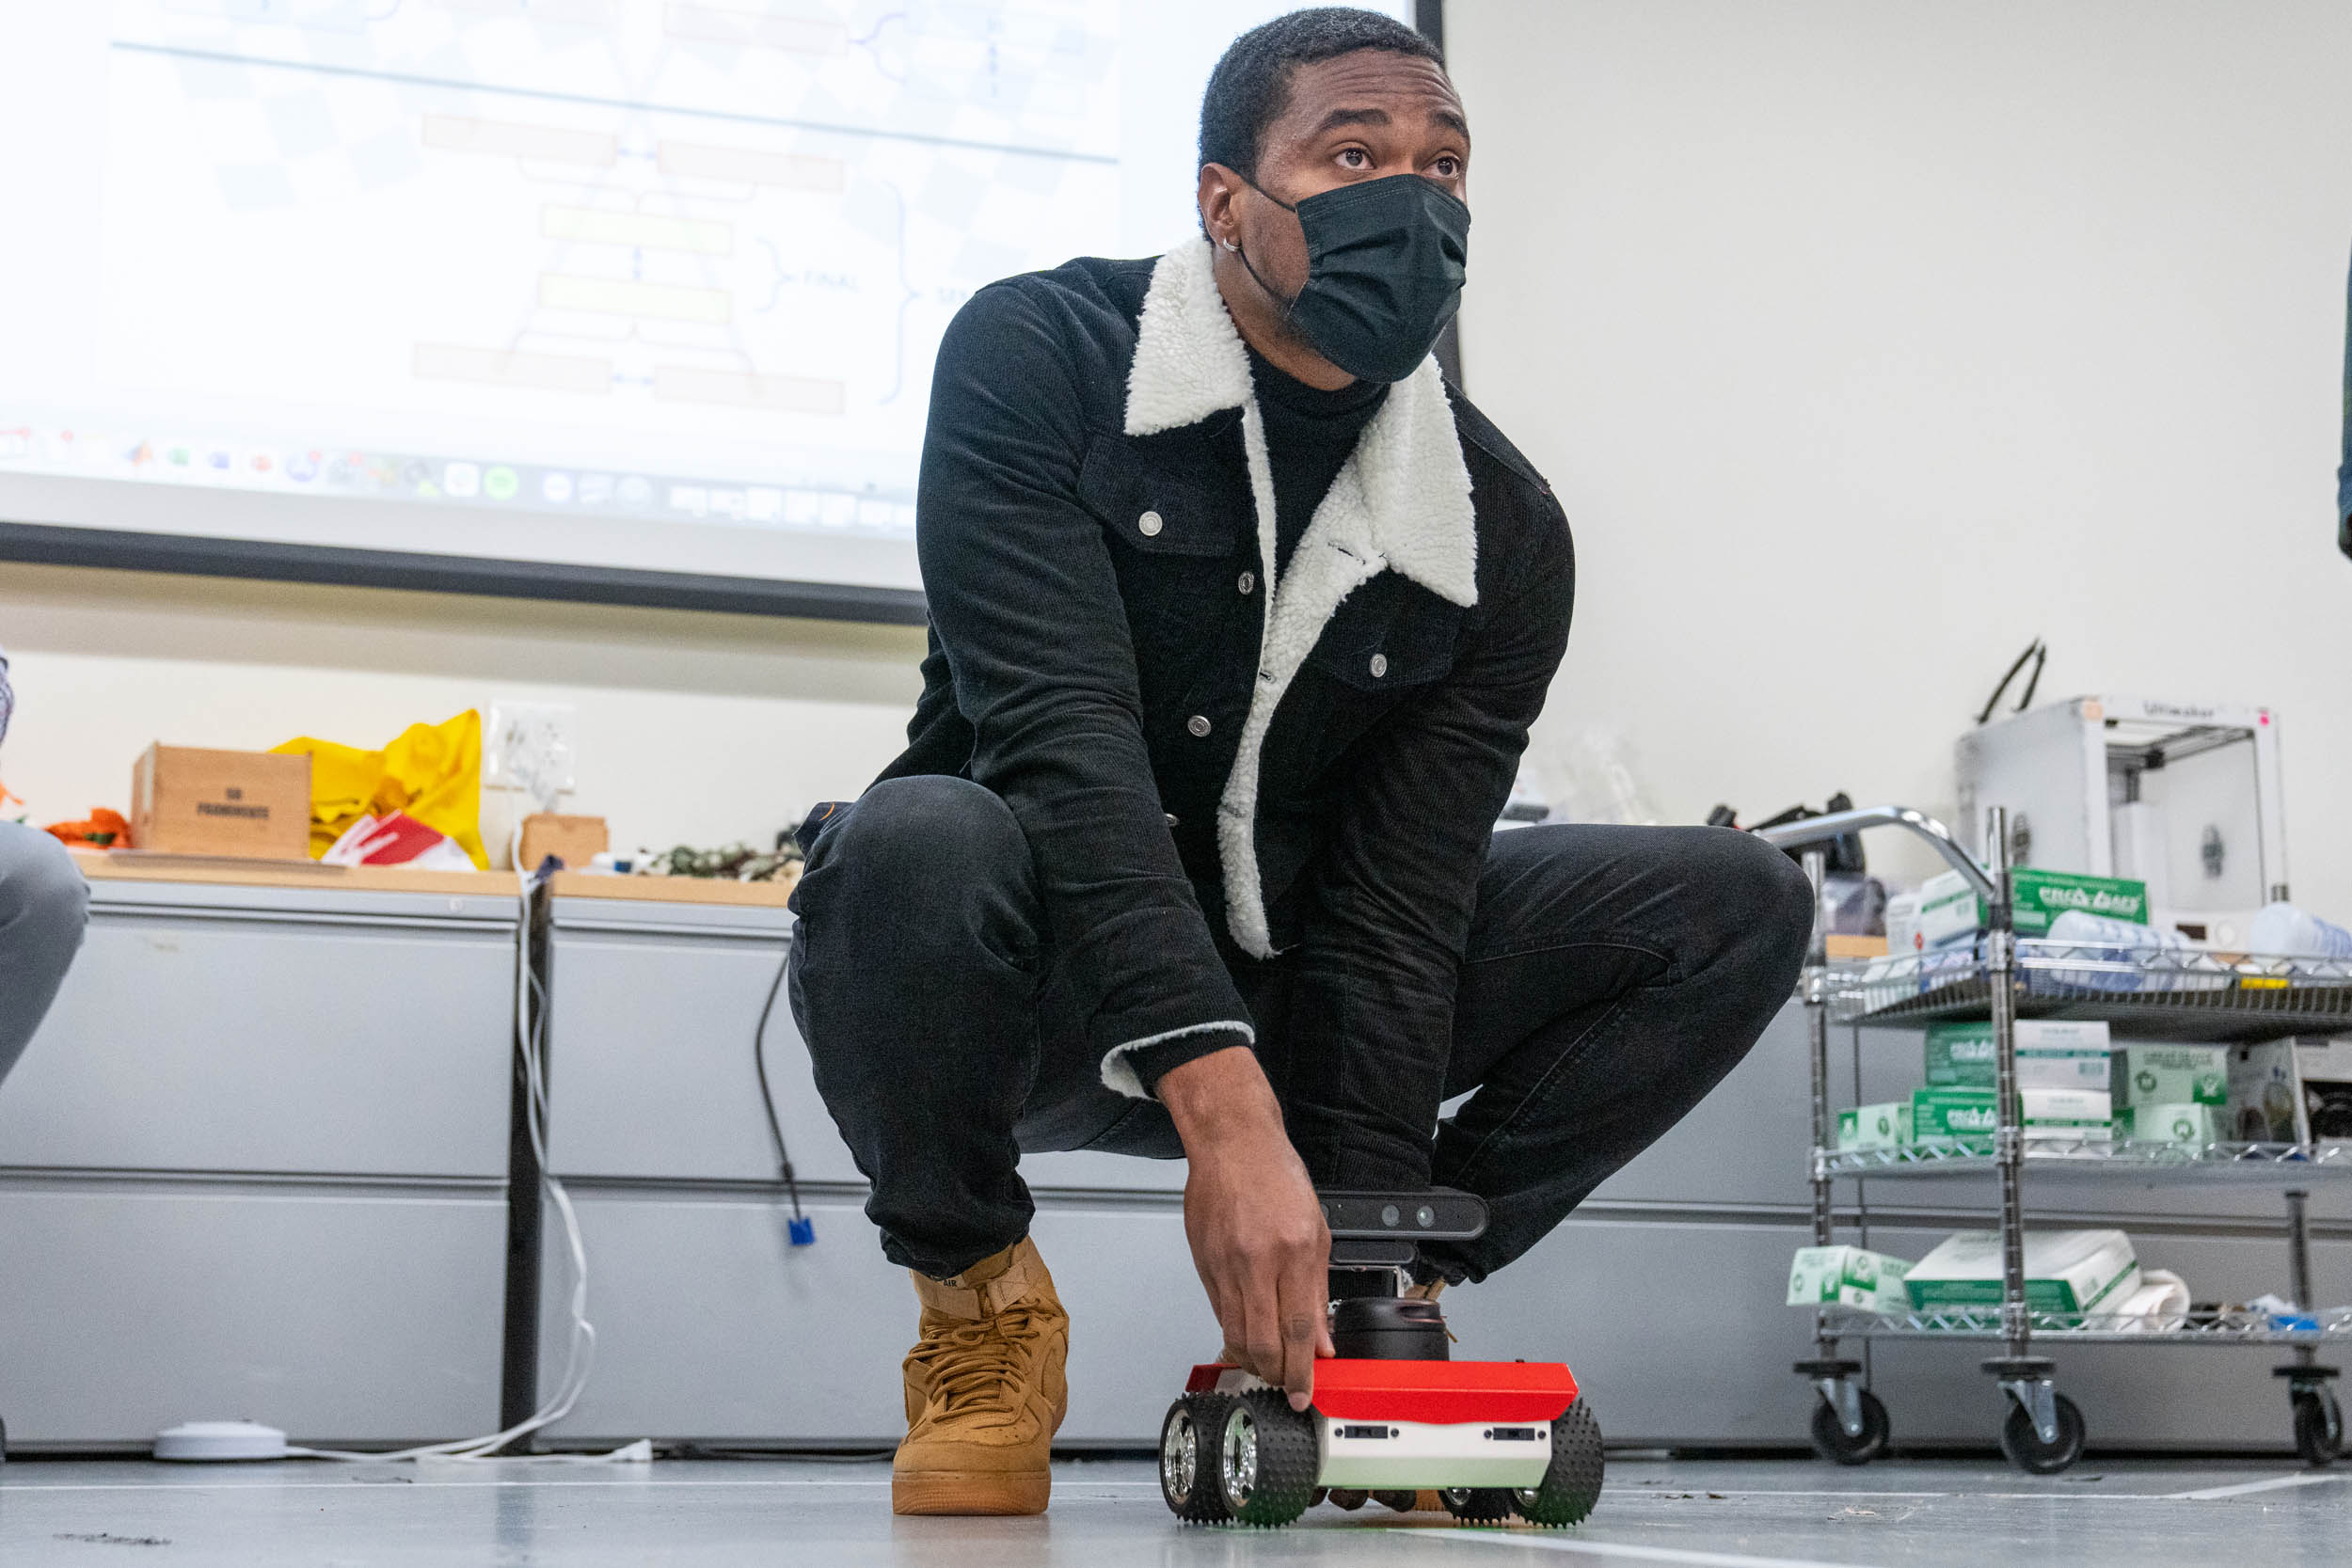 Student bent down with Autonomous Vehicle ready to compete